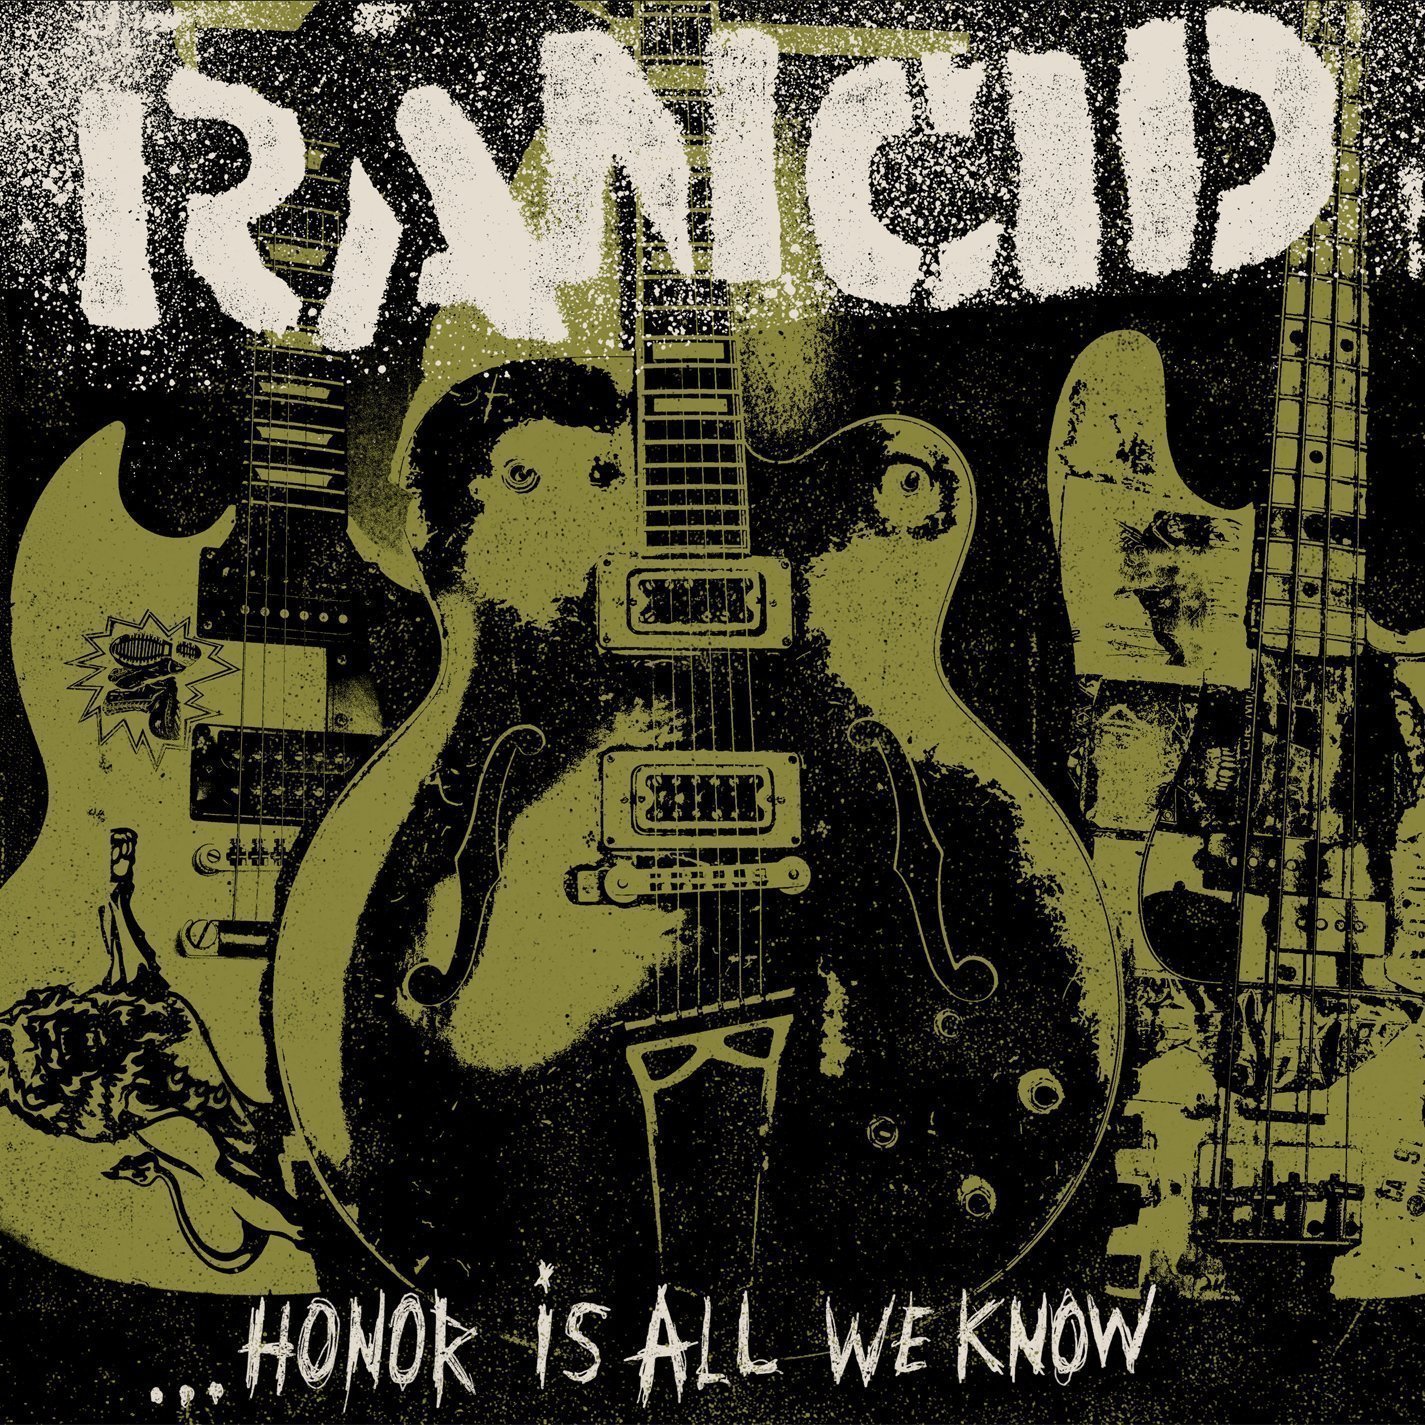 rancid-honor-is-all-we-know-album-cover-art